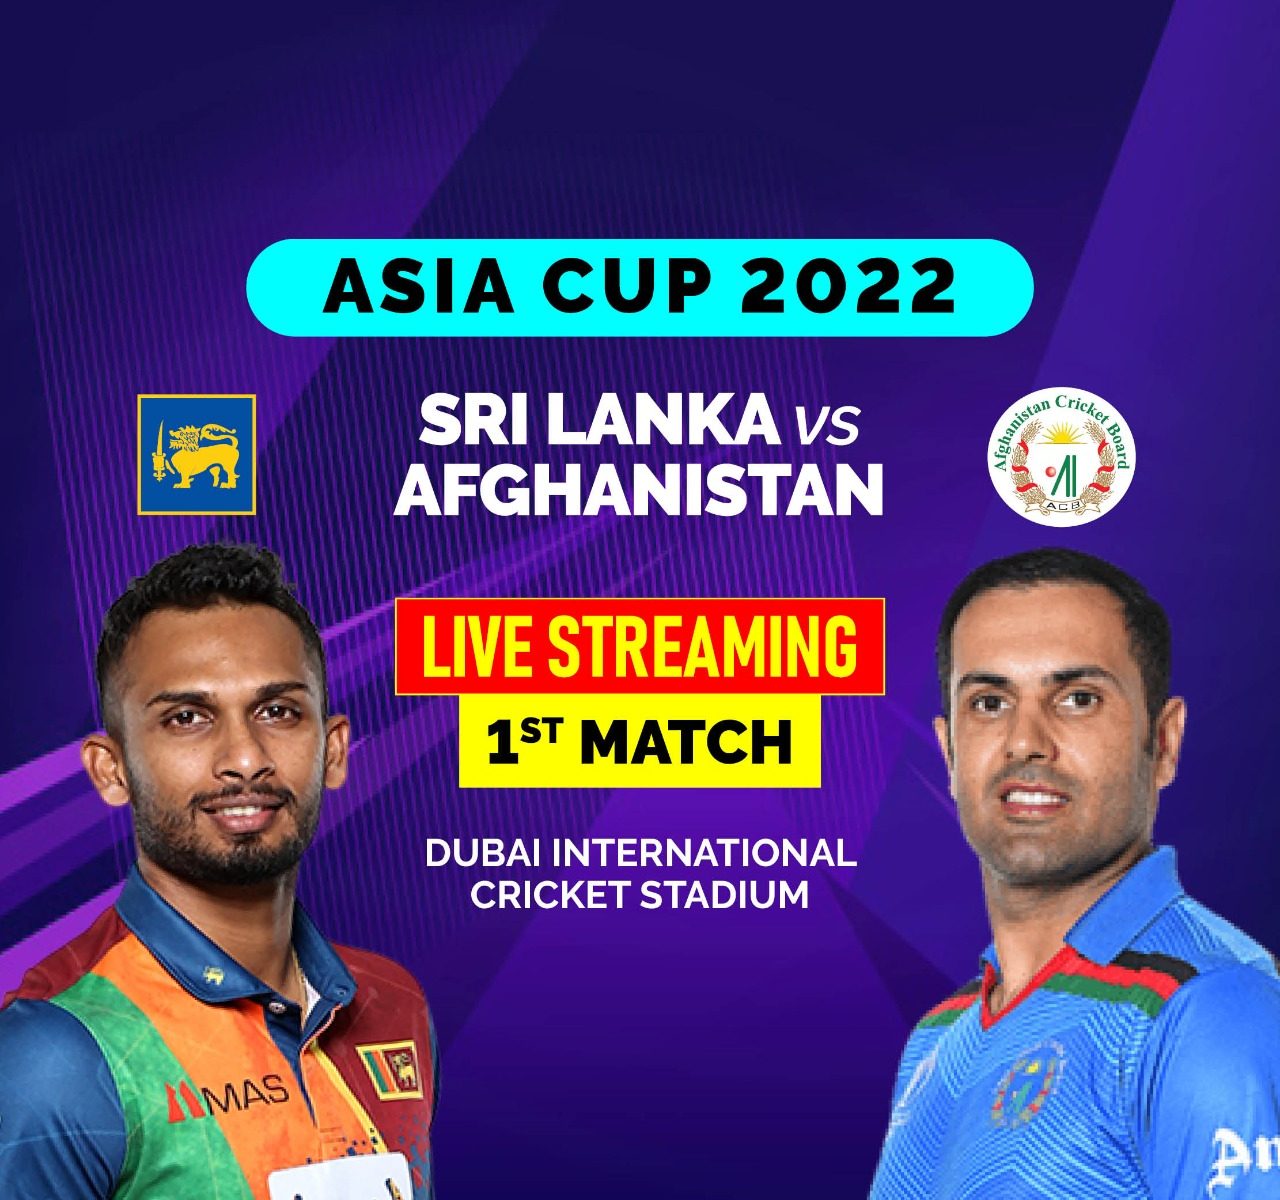 Sri Lanka vs Afghanistan, Asia Cup 2022 Live Streaming When and Where to Watch SL vs AFG Live Coverage on Live TV and Online